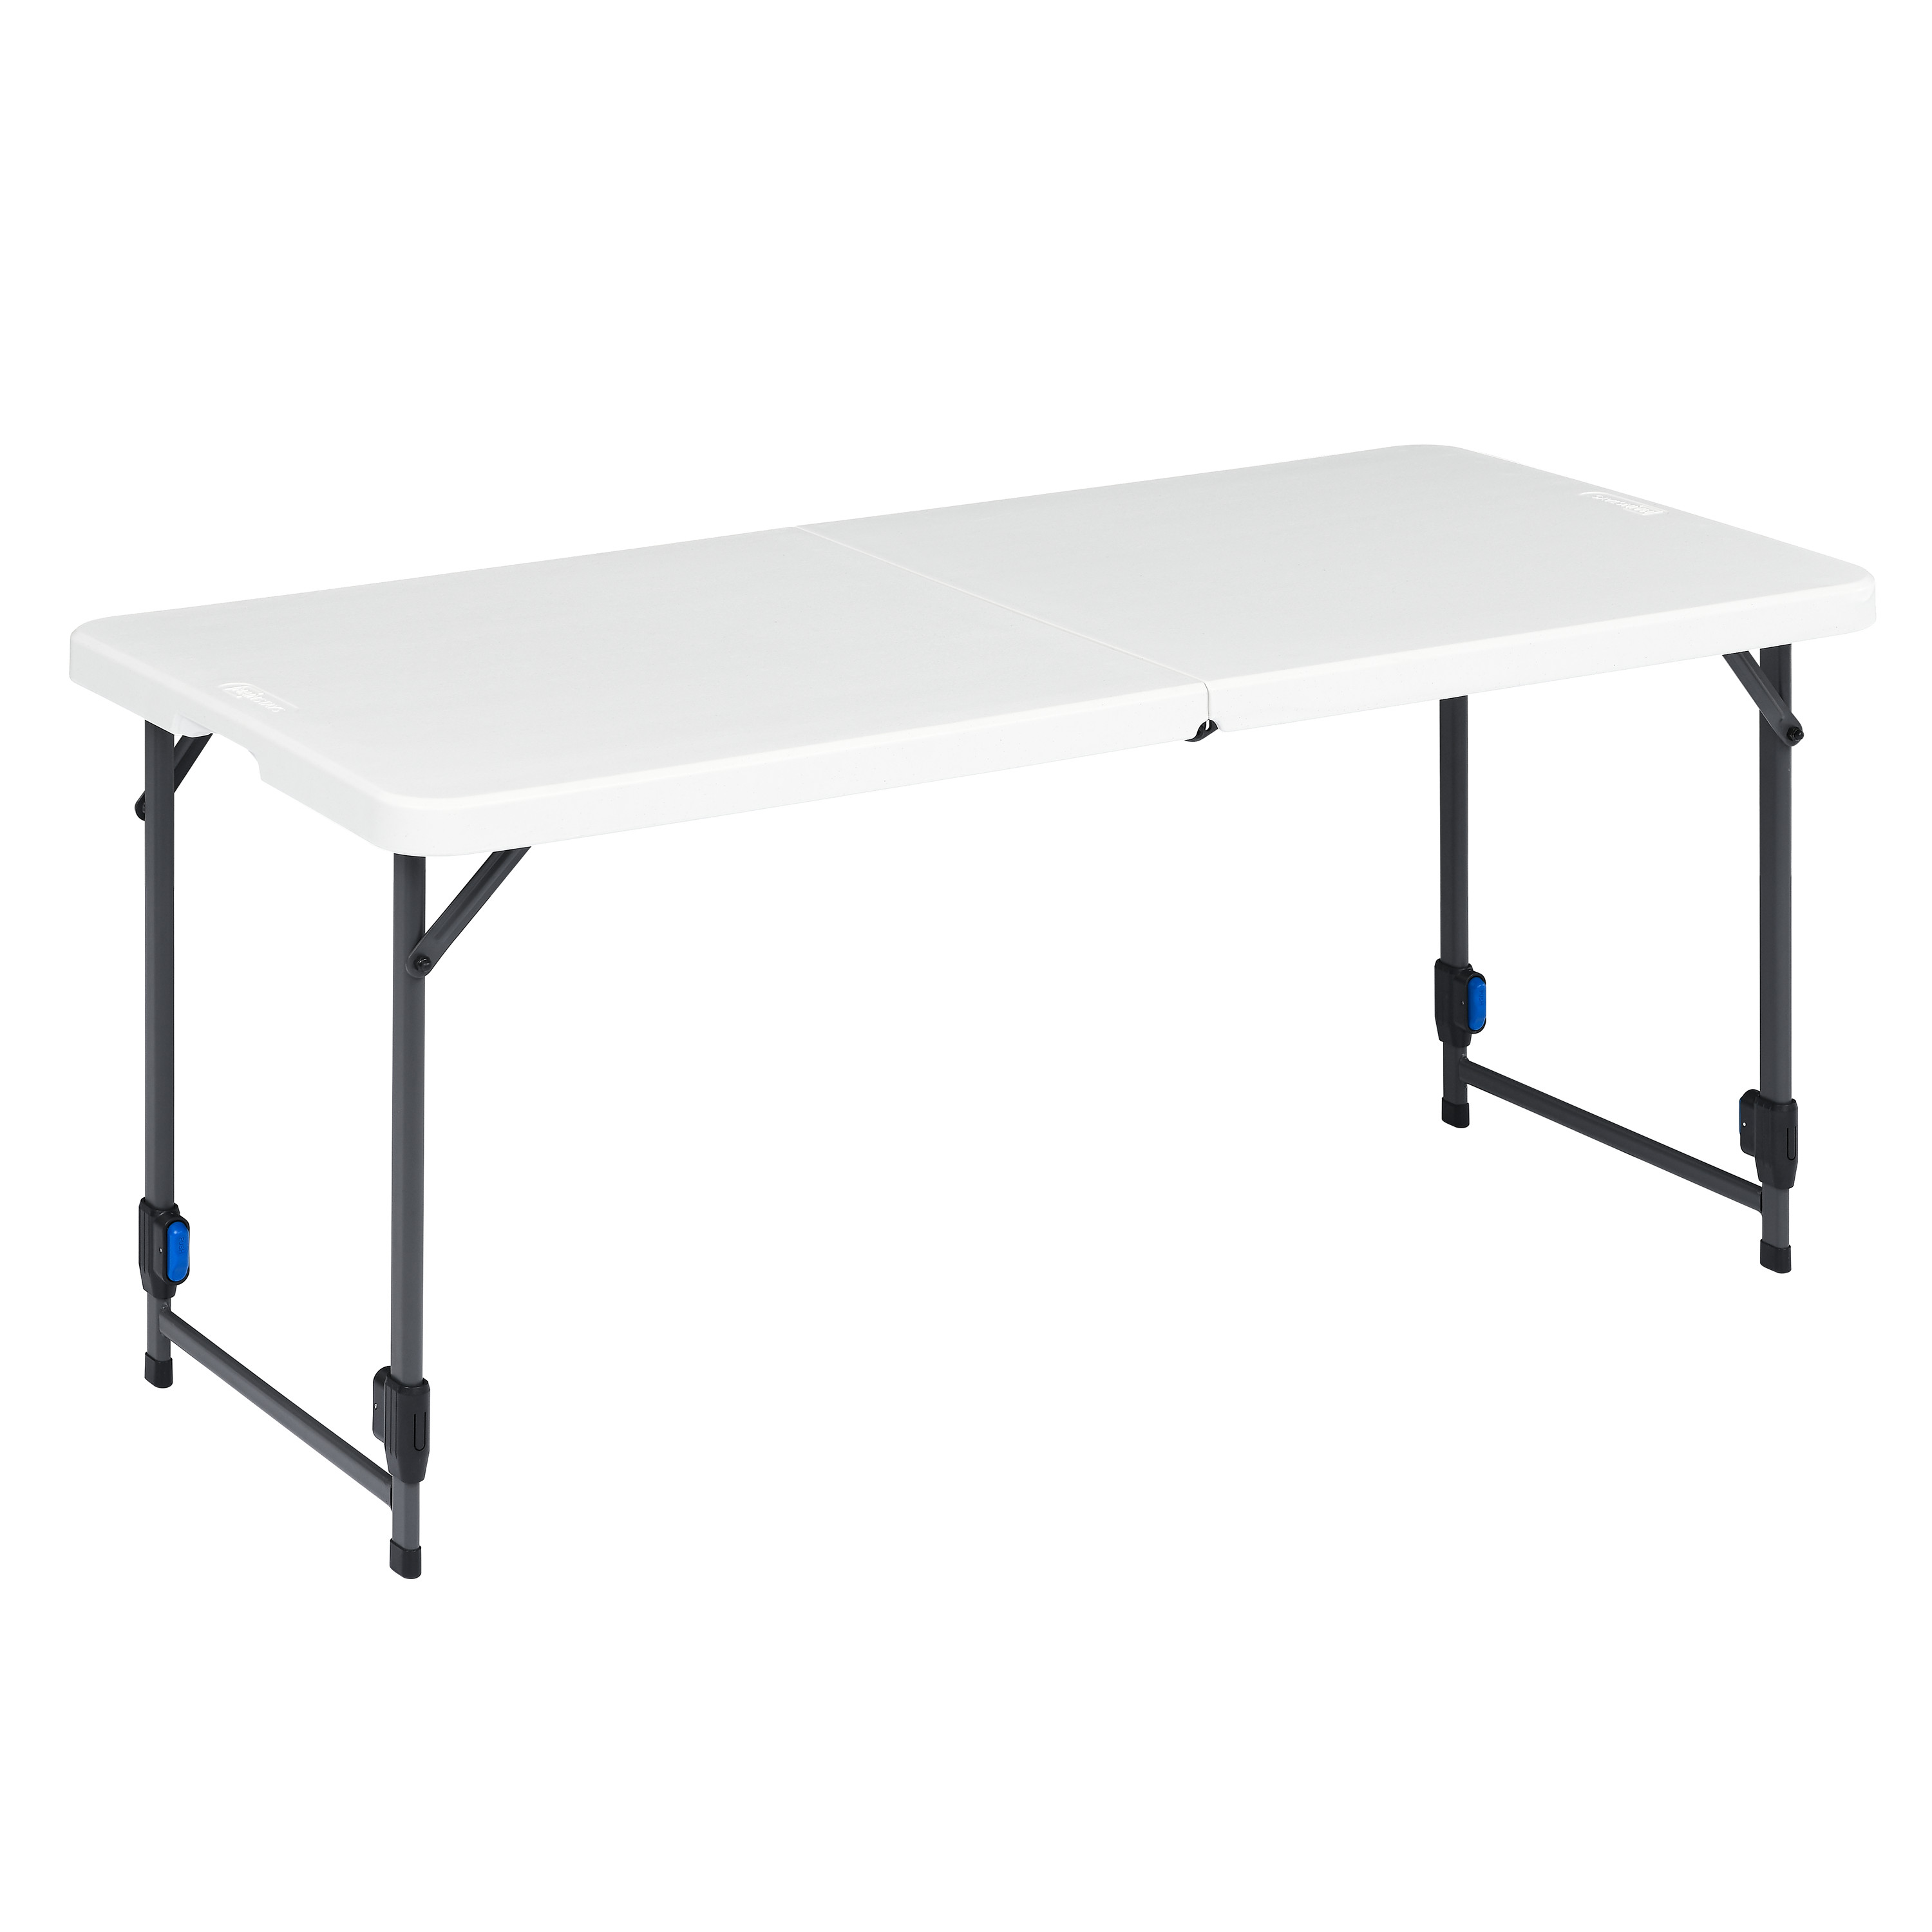 Mainstays 4 Foot Adjustable Height Folding Table with Pinch Free Buttons, White Granite - image 5 of 13